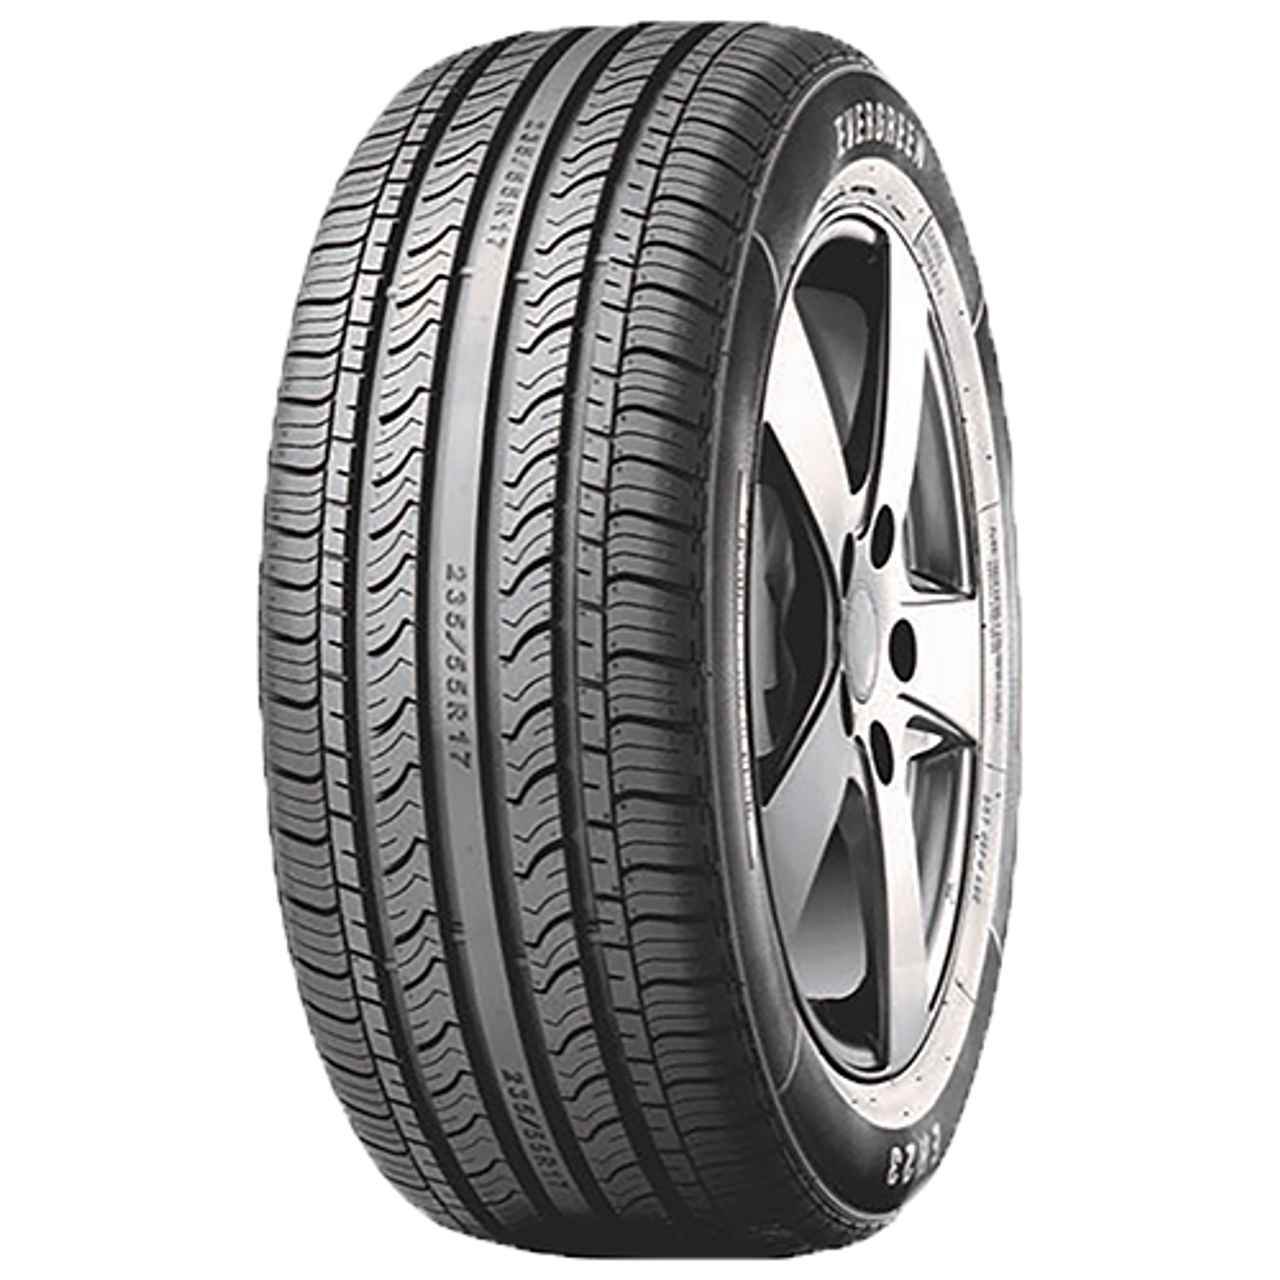 EVERGREEN EH23 185/60R15 88H BSW